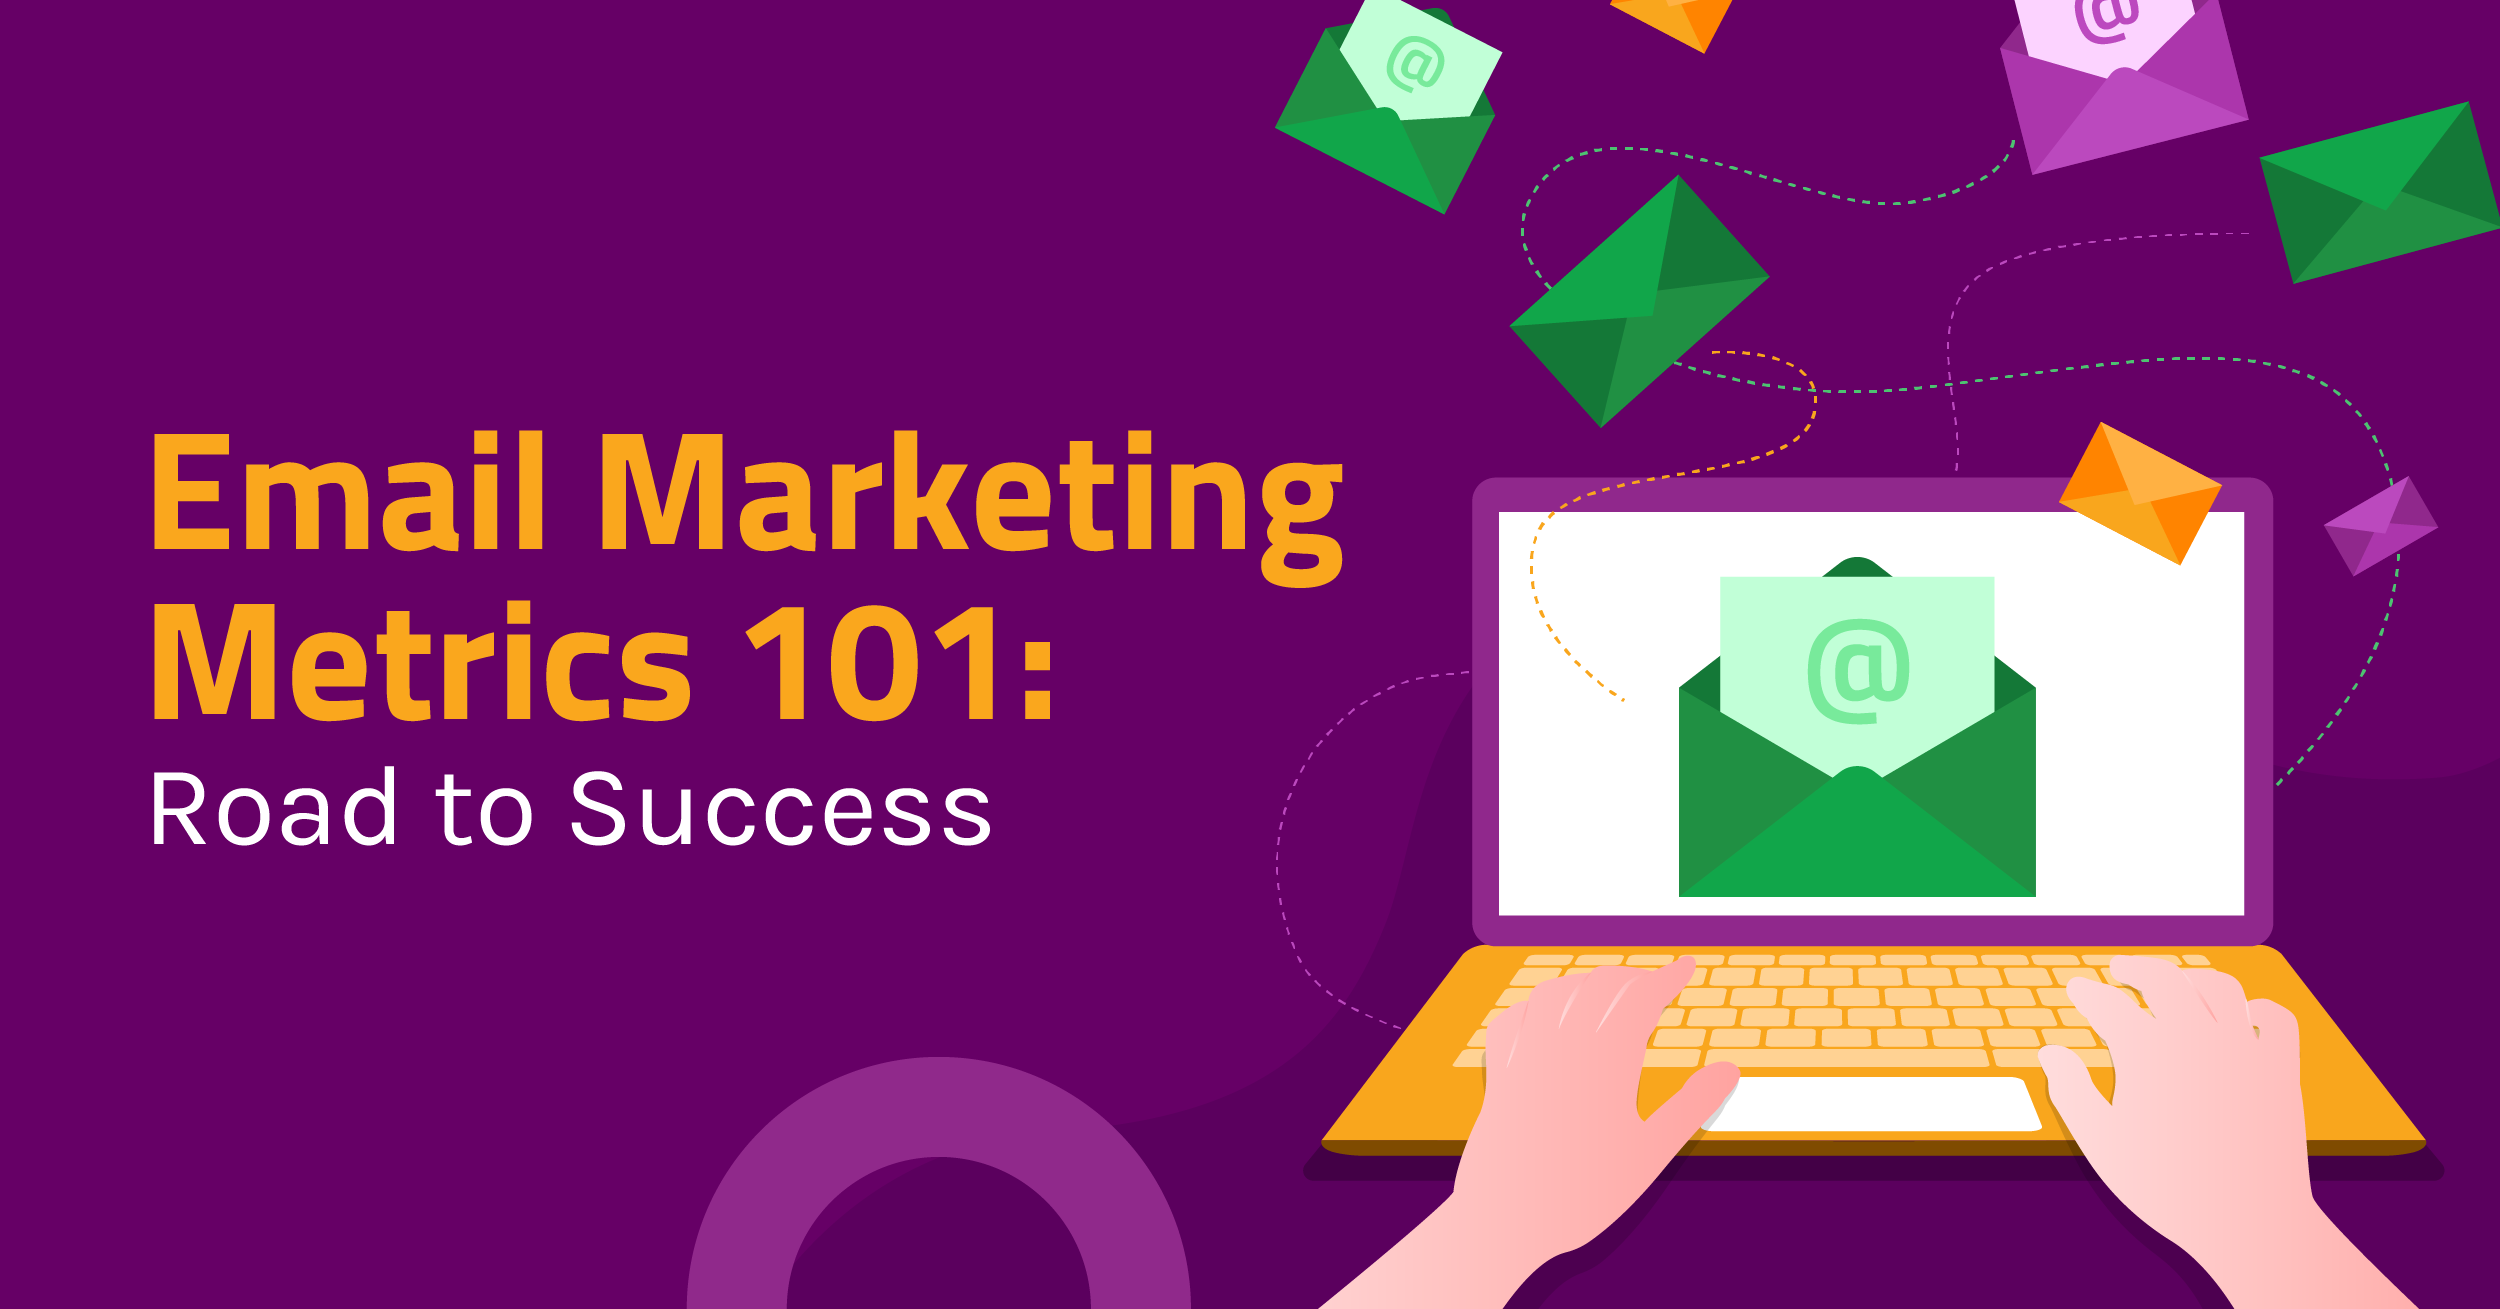 Email Marketing Metrics 101: Road to Success